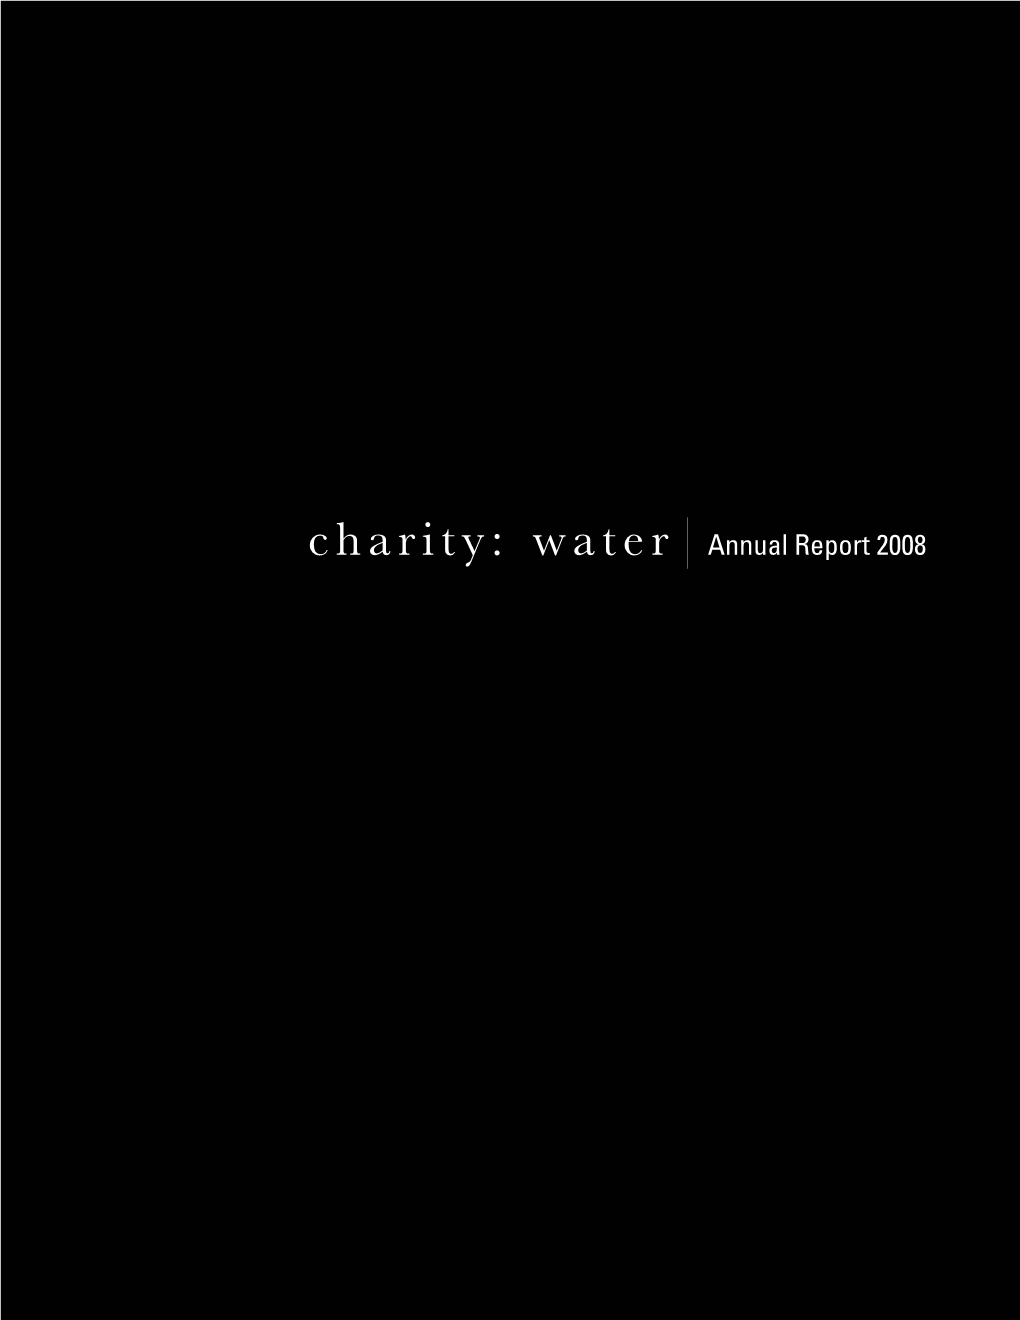 Annual Report 2008 2008 Has Been a Year of Incredible Growth, Blessing and Change for Charity: Water